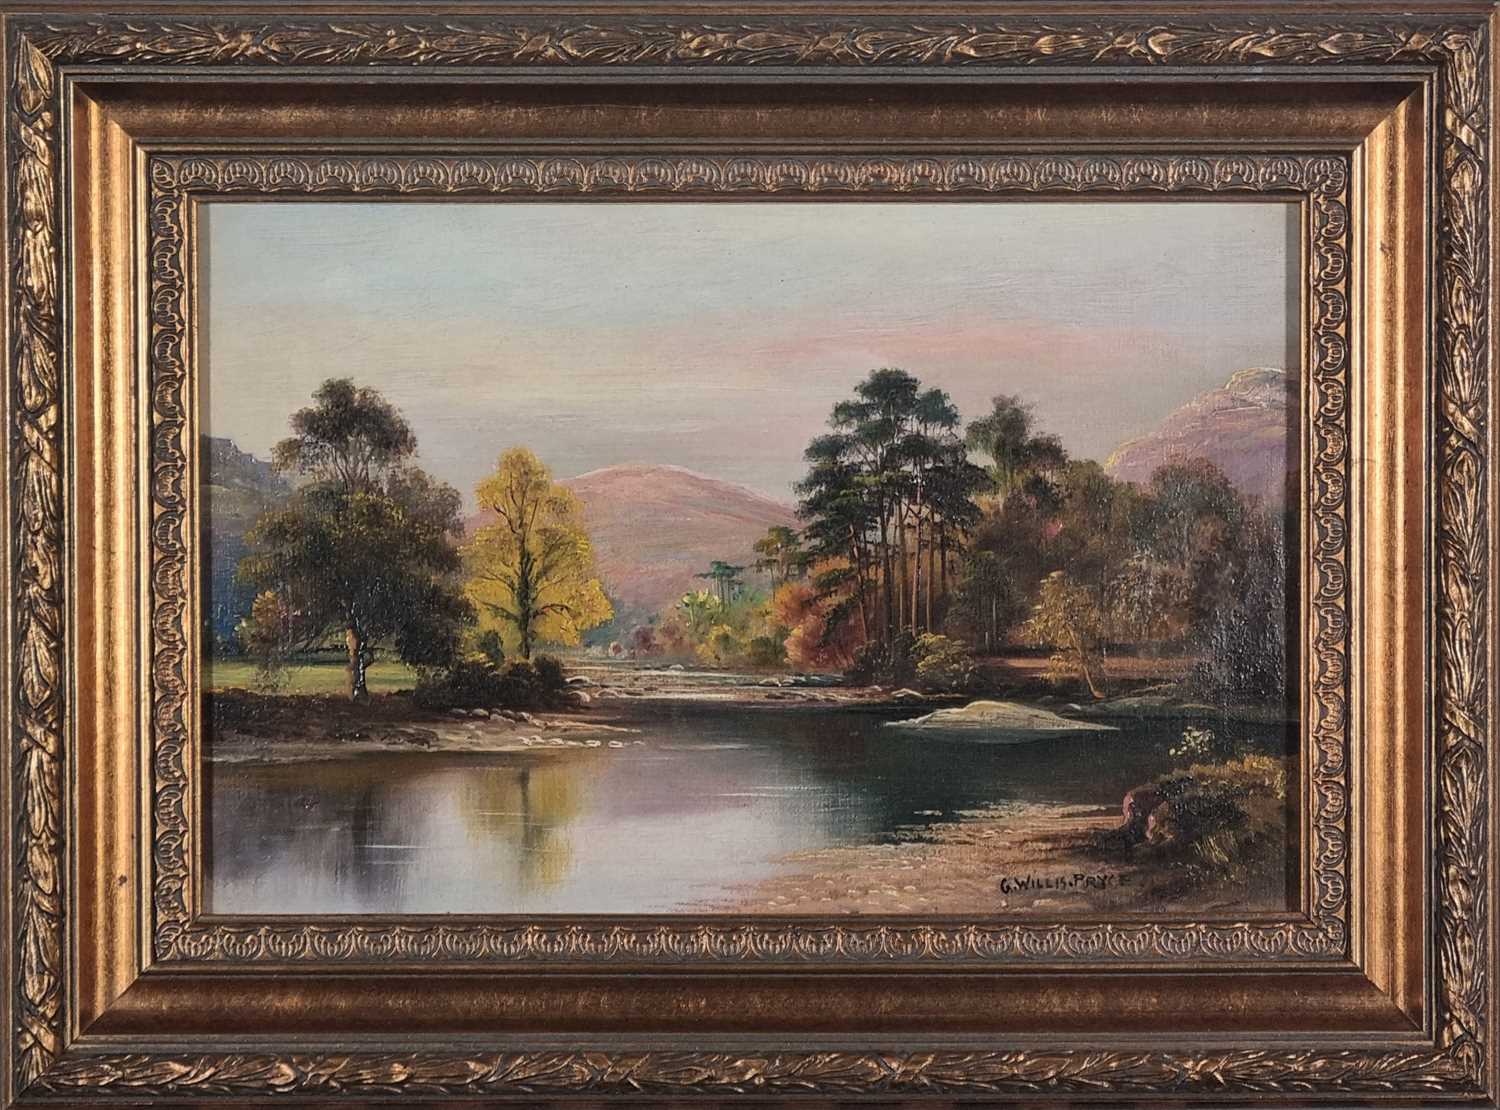 George Willis PRYCE (British 1866-1949) River Landscape, Oil on canvas, Signed lower right, 7.5" x - Image 2 of 9